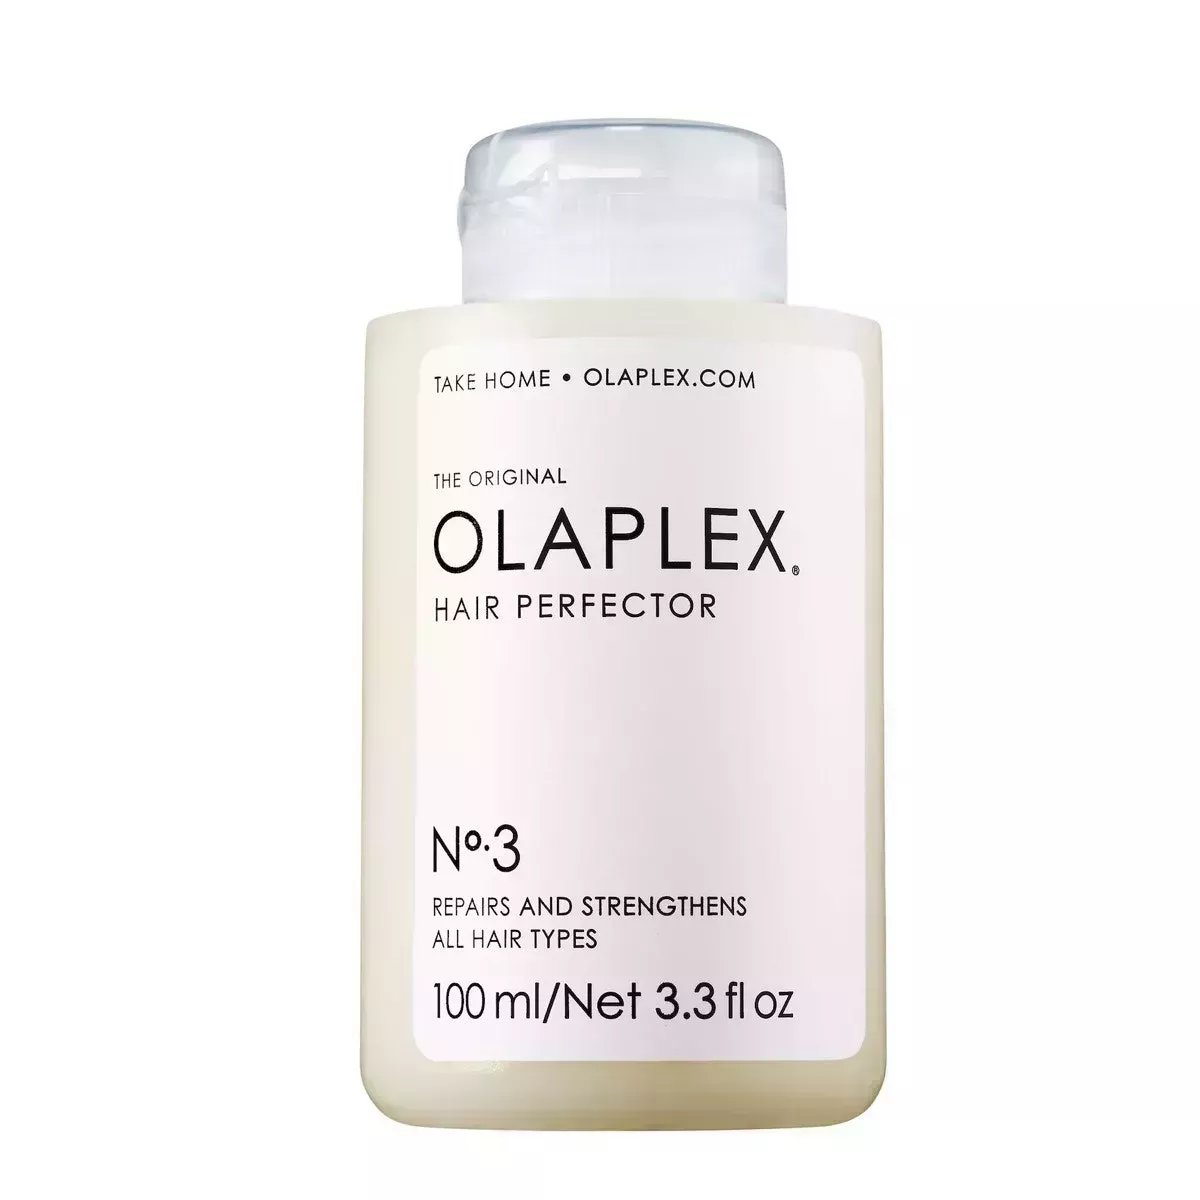 A clear bottle of Olaplex No. 3 Hair Perfector with a white label on a white background